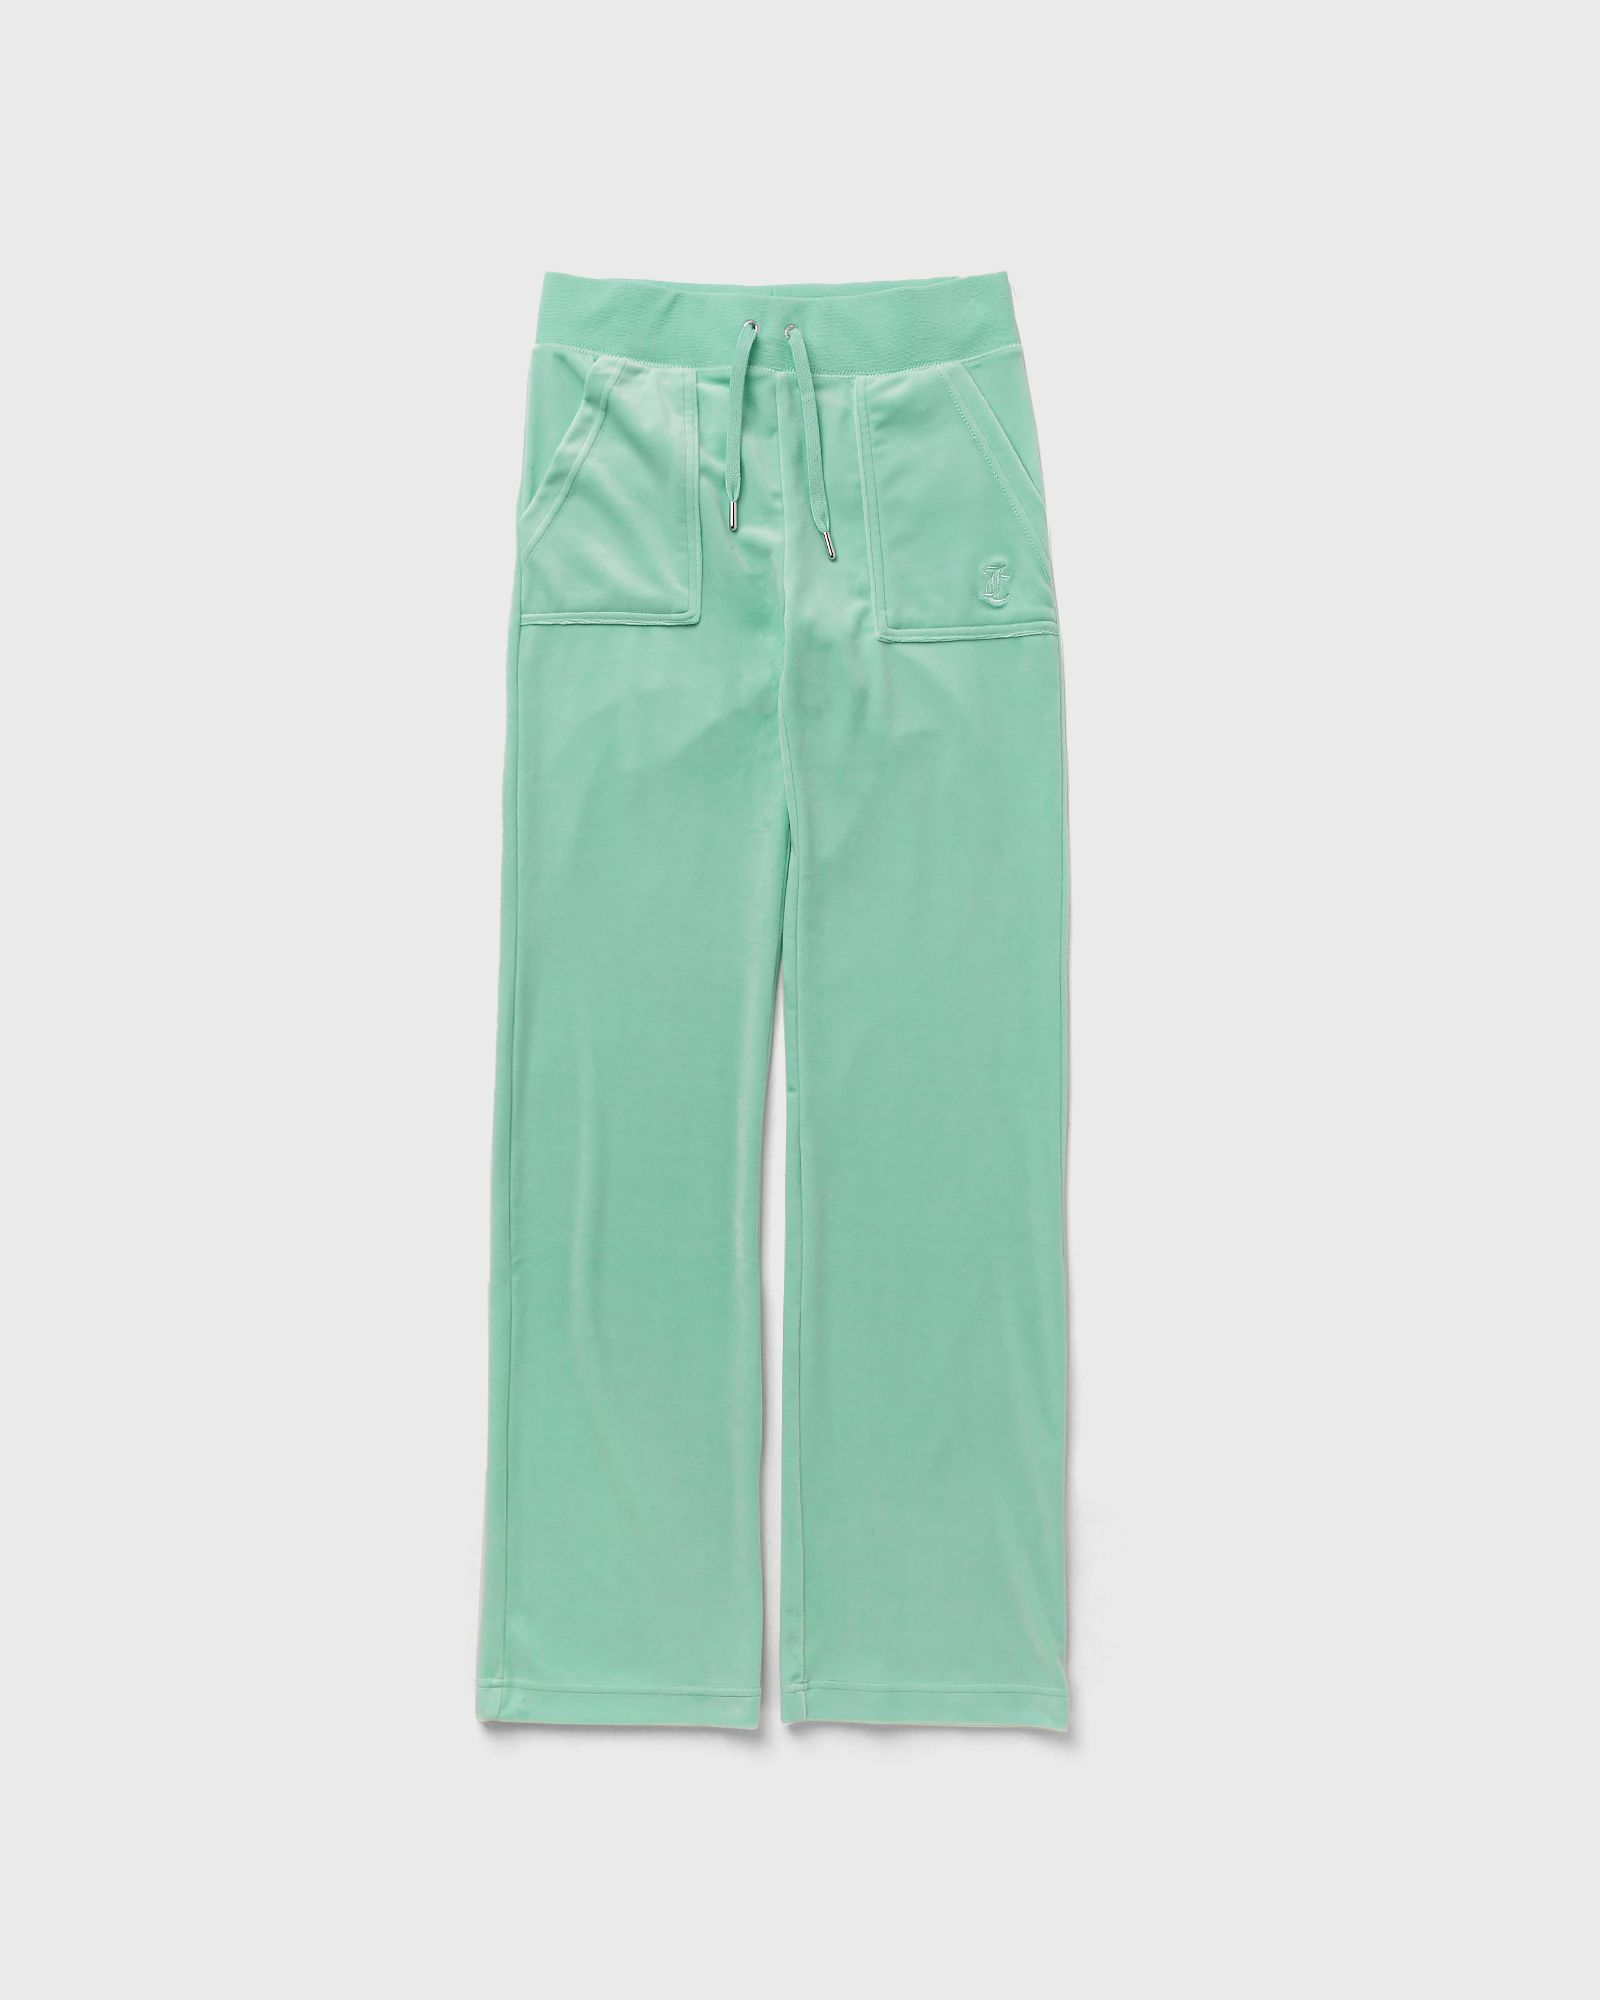 Juicy Couture WMNS Classic Velour Del Ray Pant women Sweatpants green in Größe:S von Juicy Couture